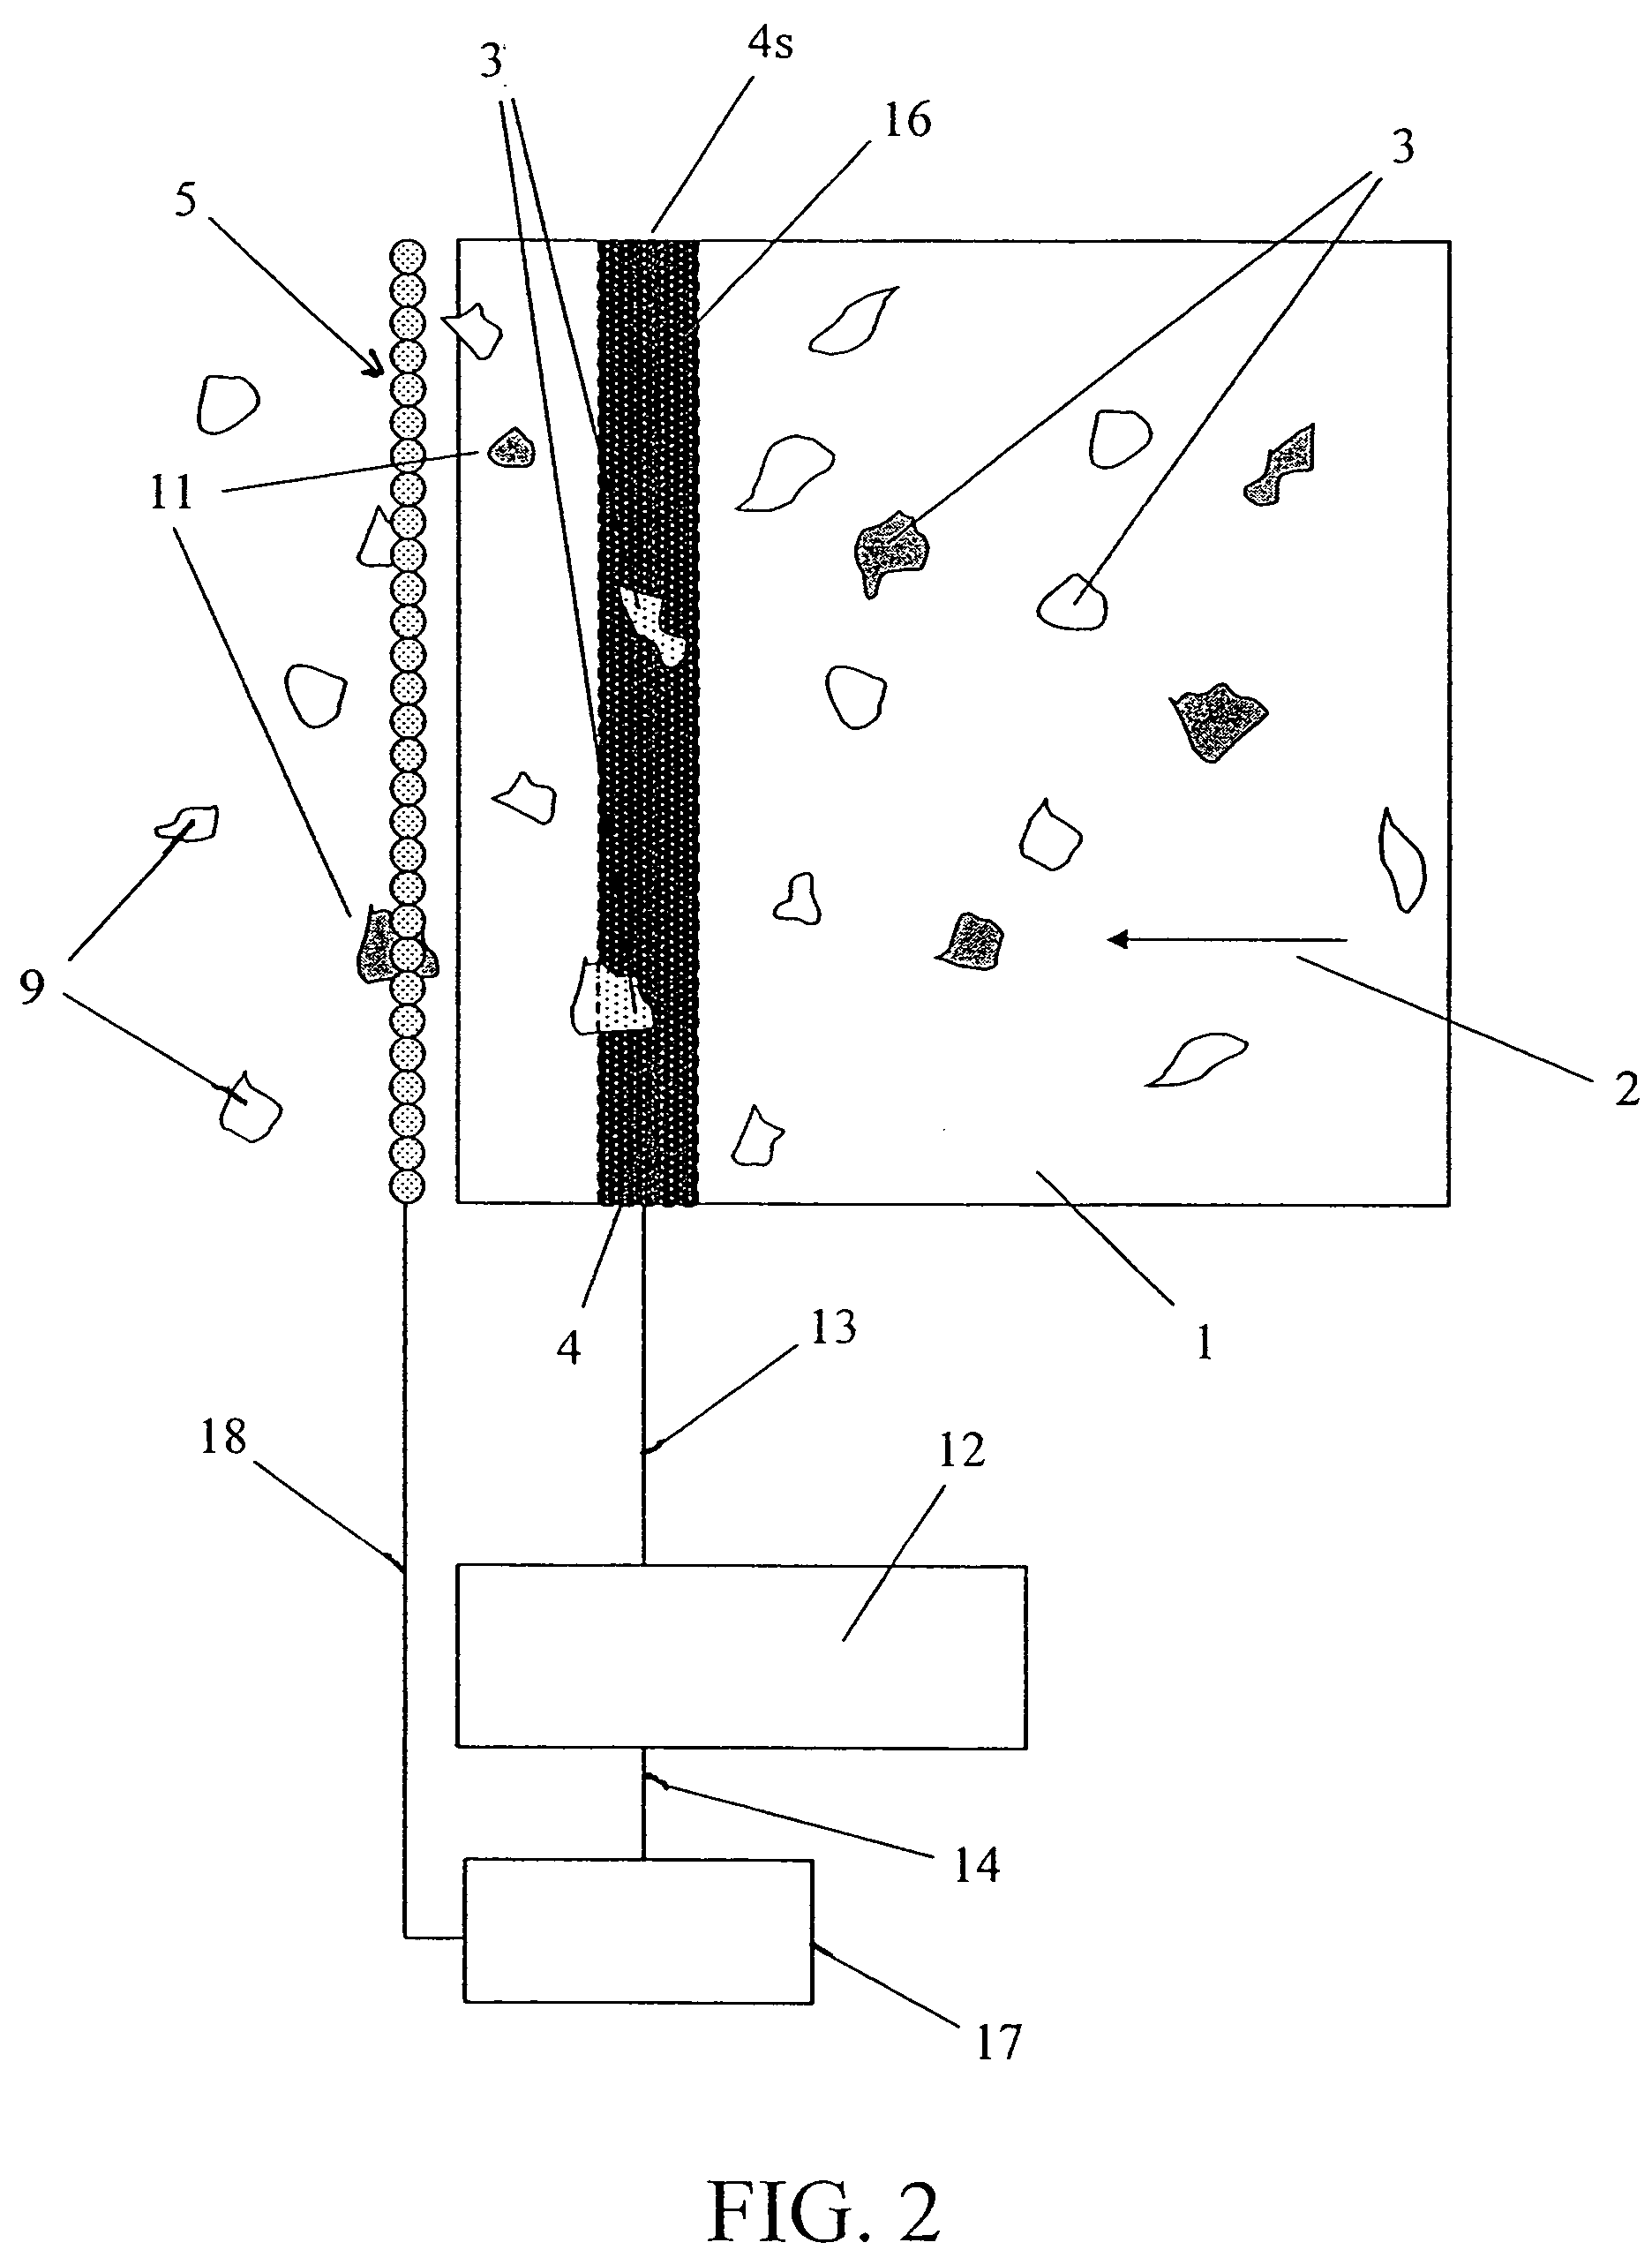 Method and apparatus for sorting materials according to relative composition